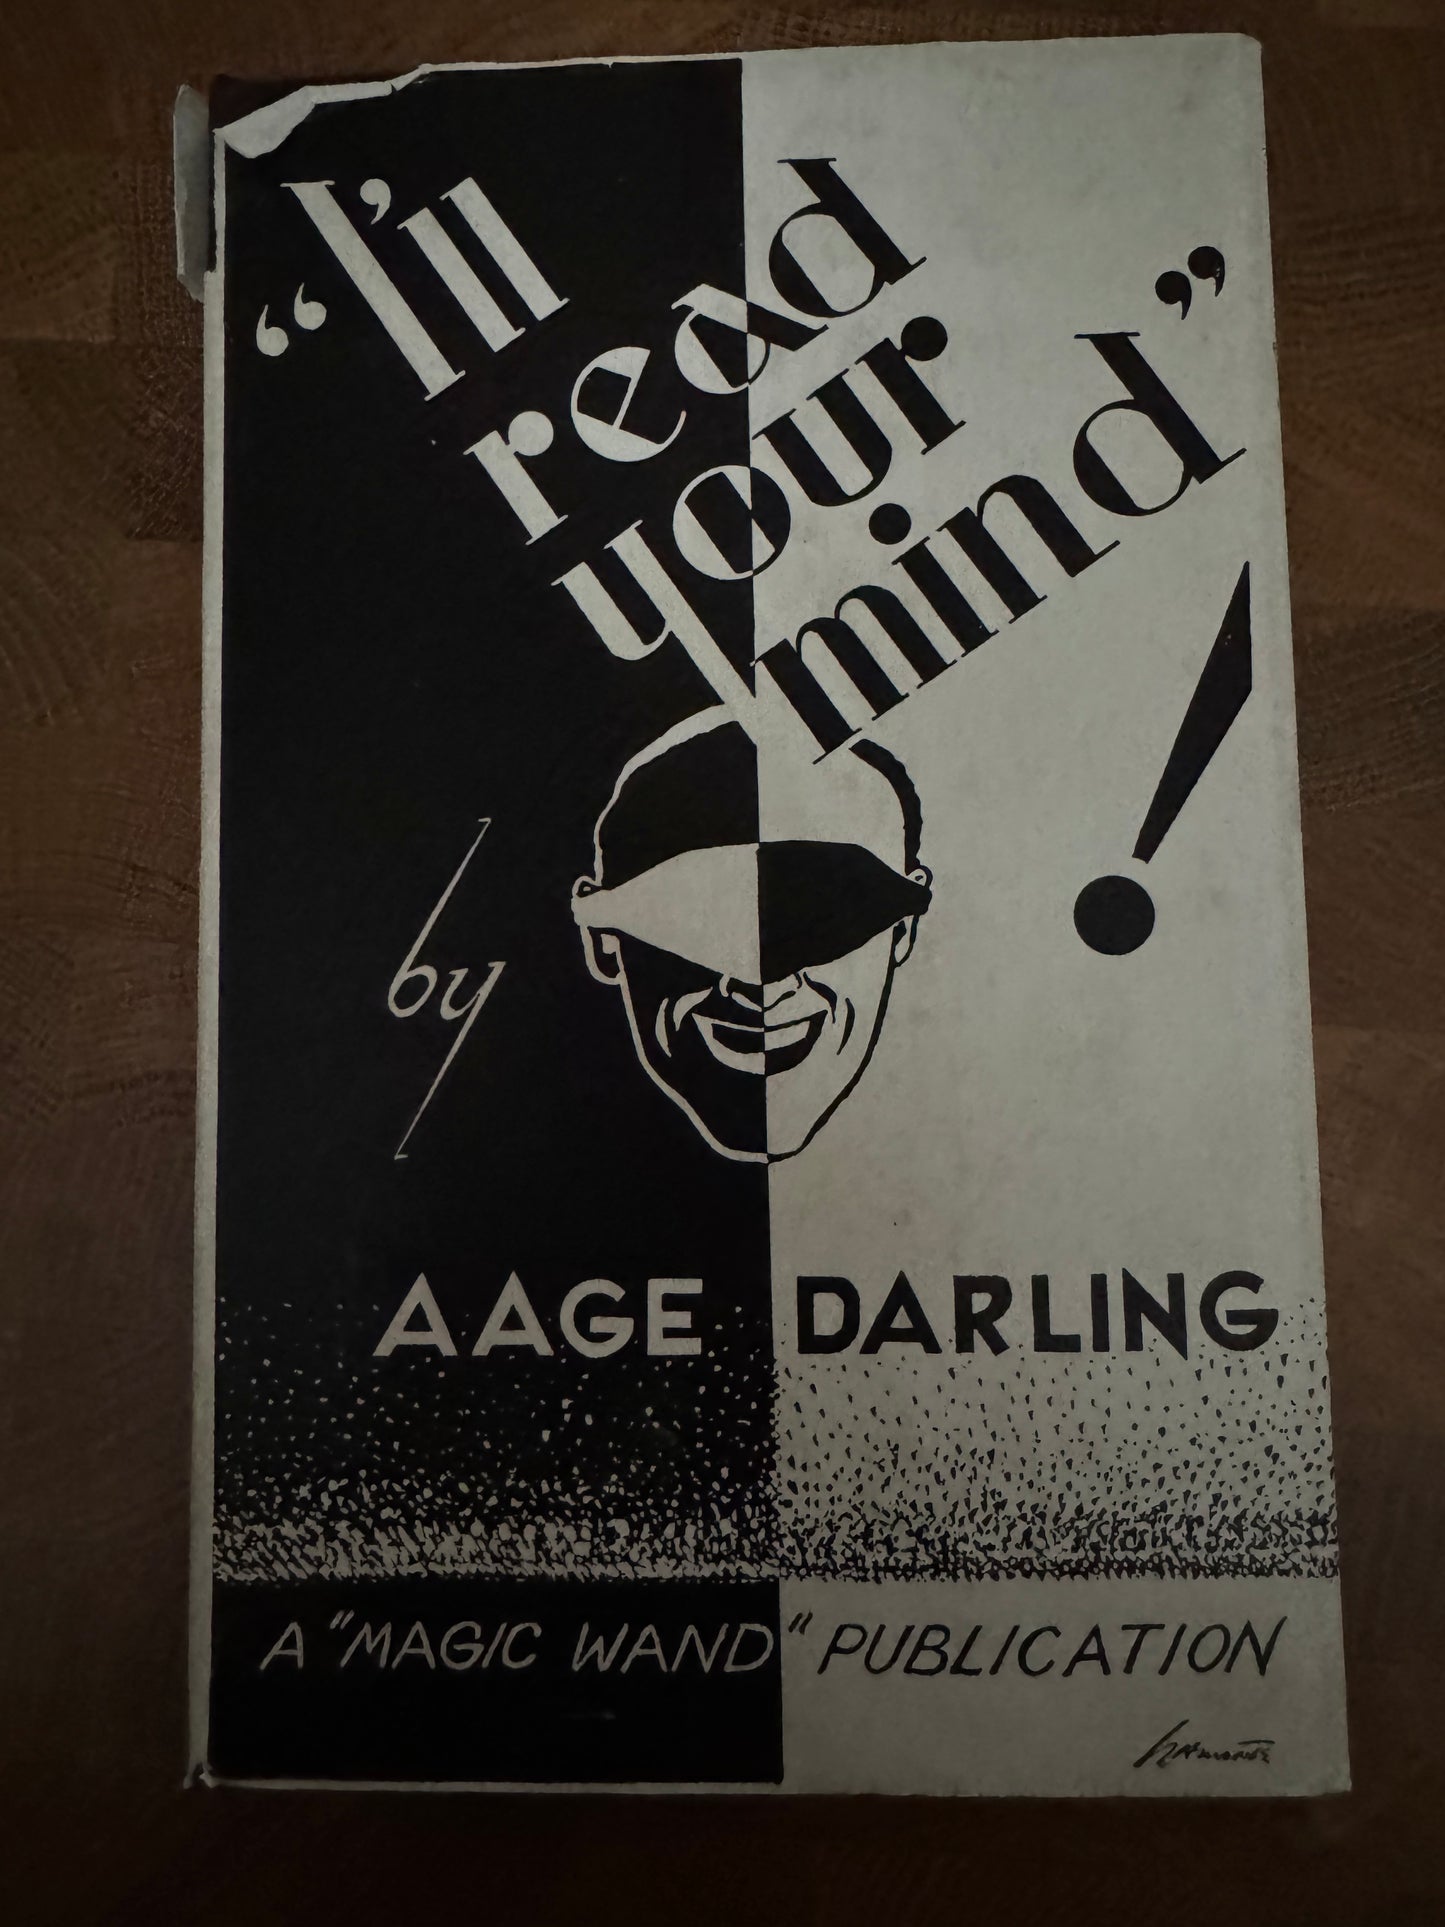 "I'll Read Your Mind" - Aage Darling